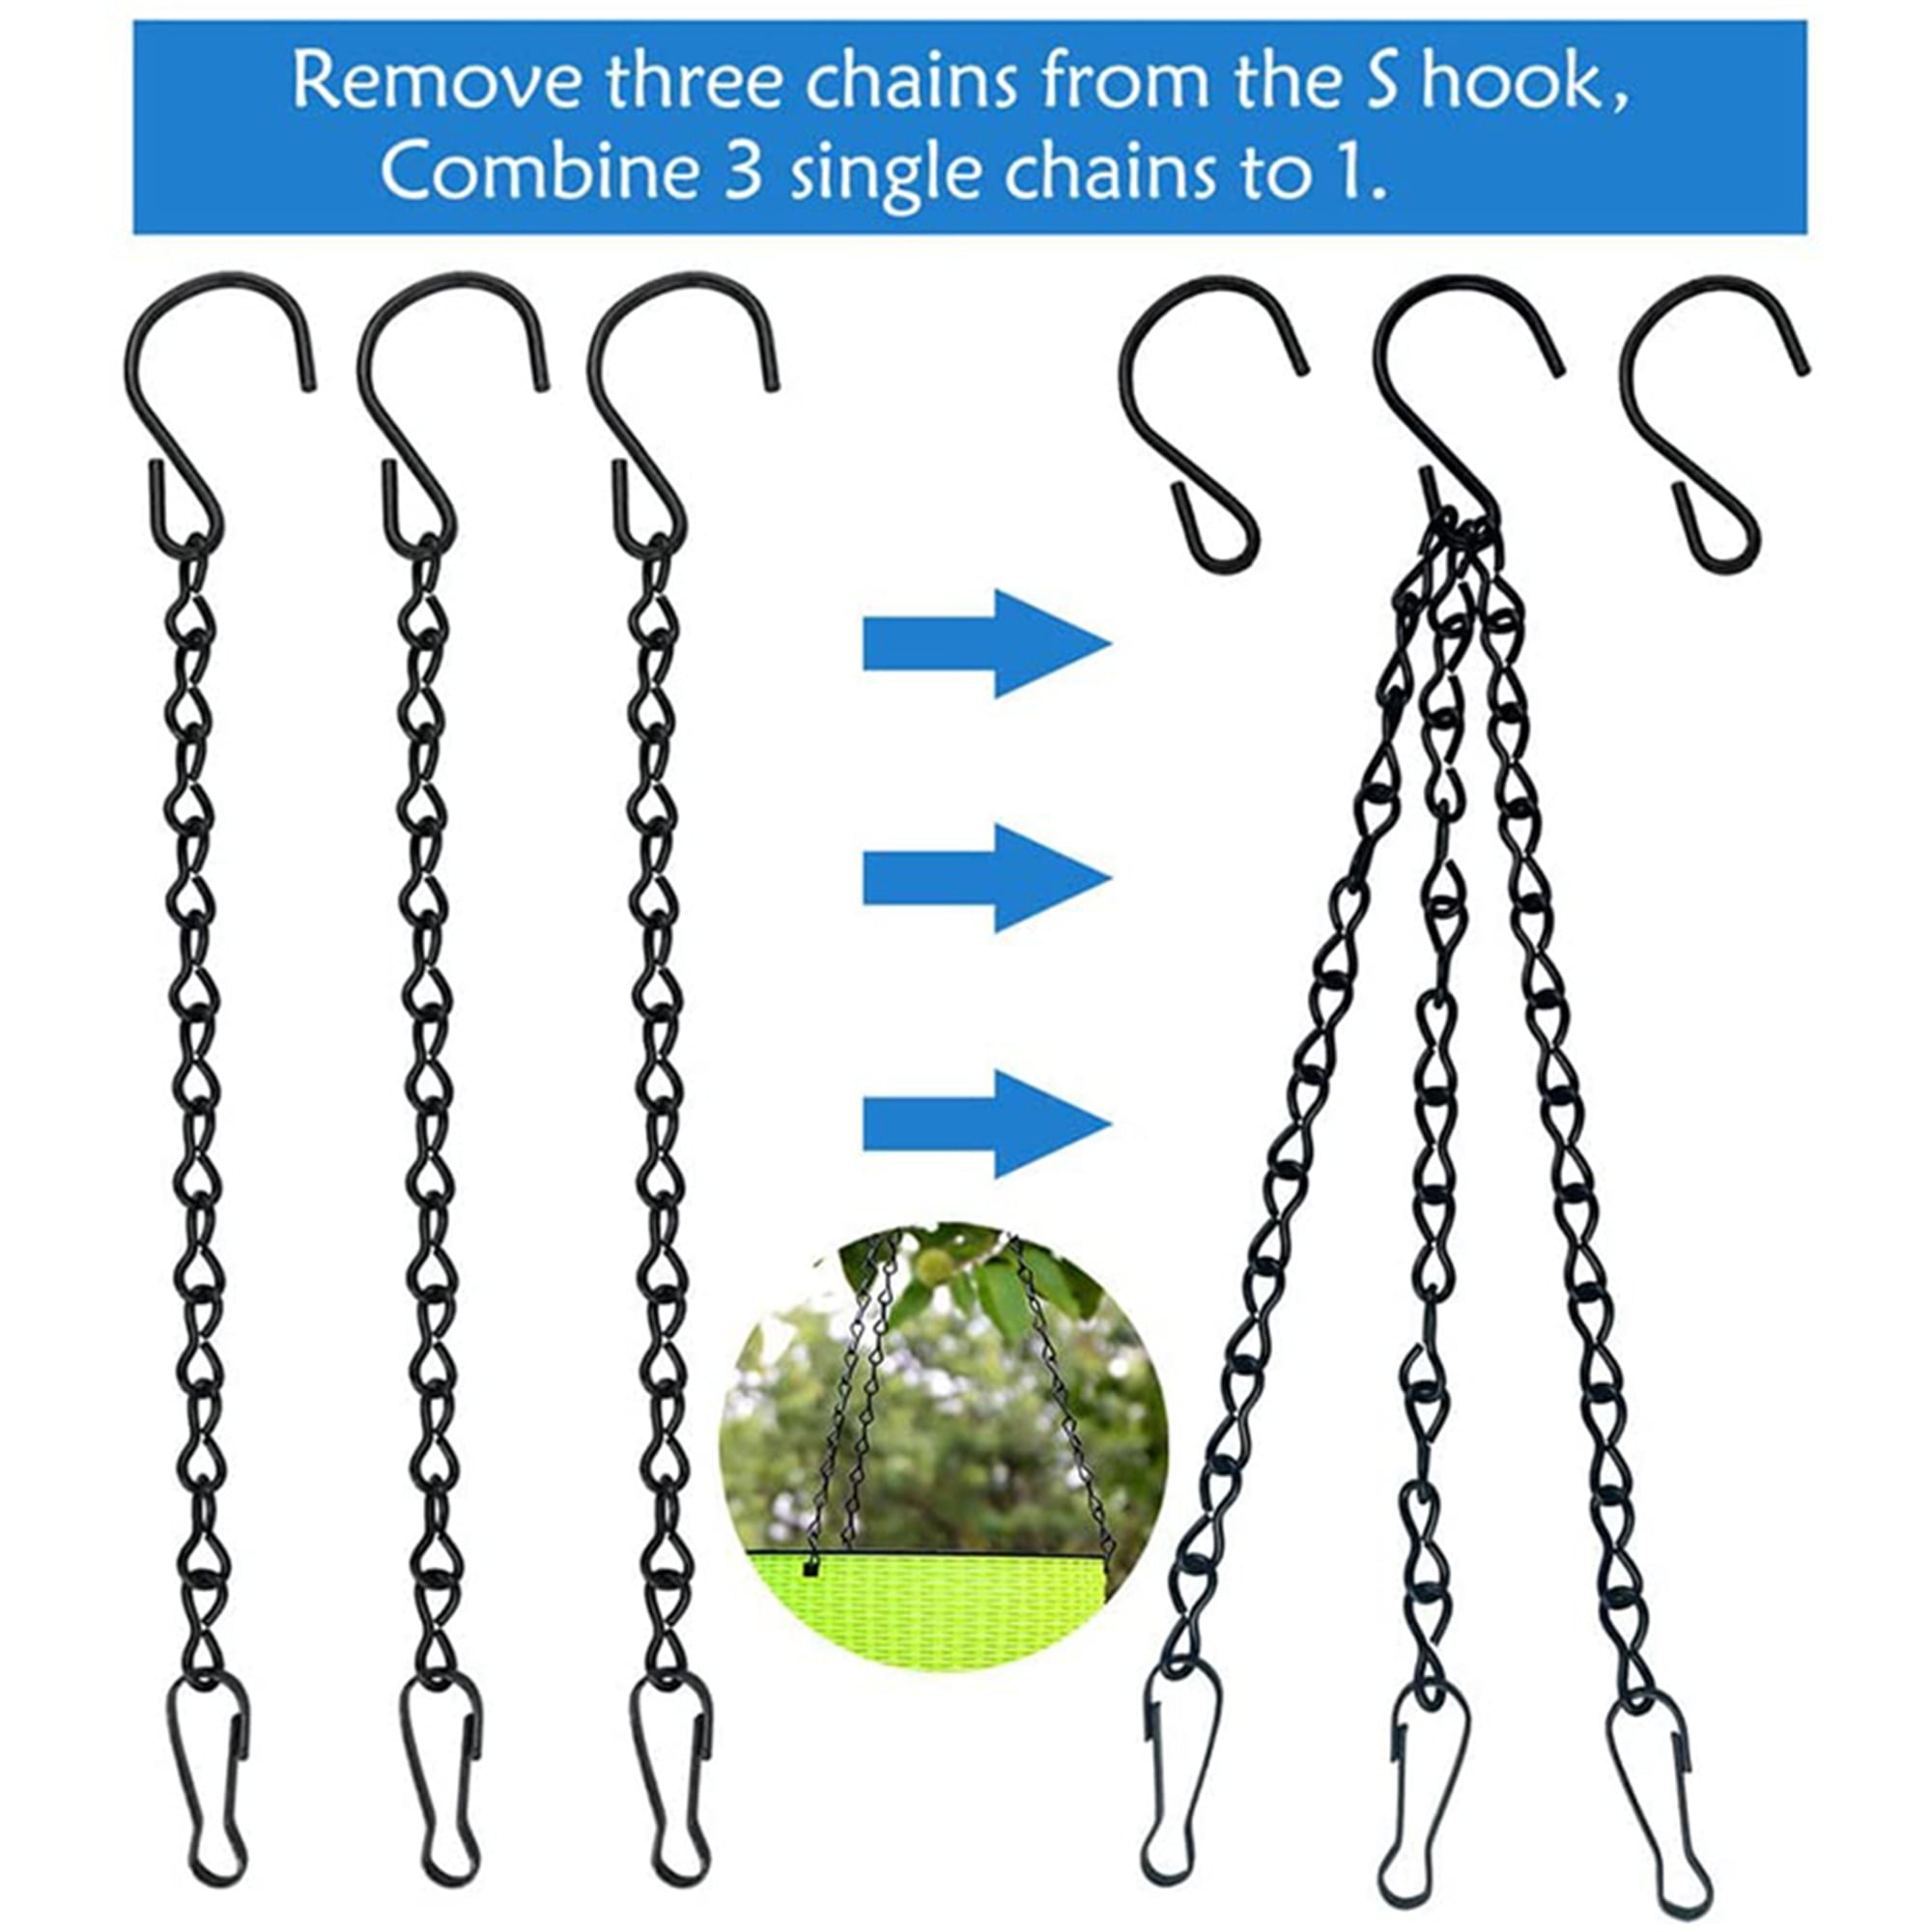 The hanging chain